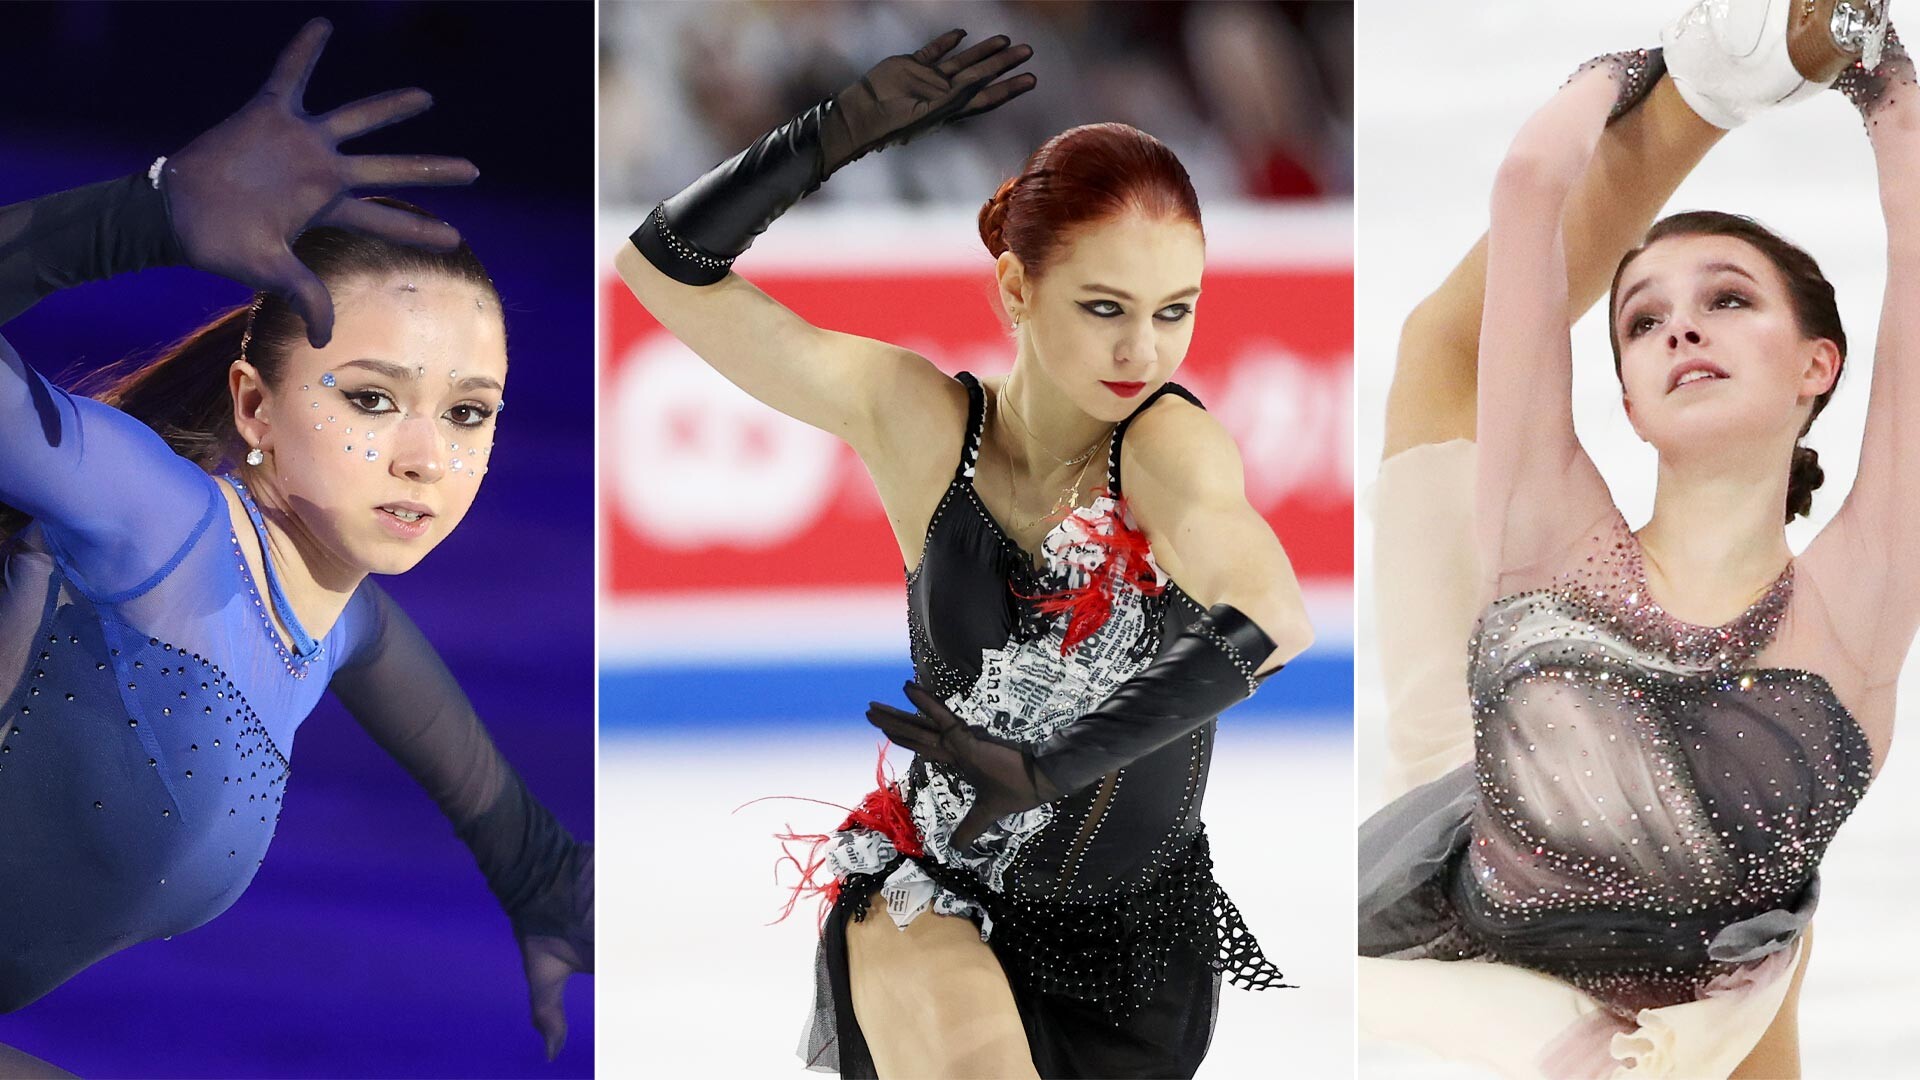 The Elegance and Style of Russian Figure Skating Fashion